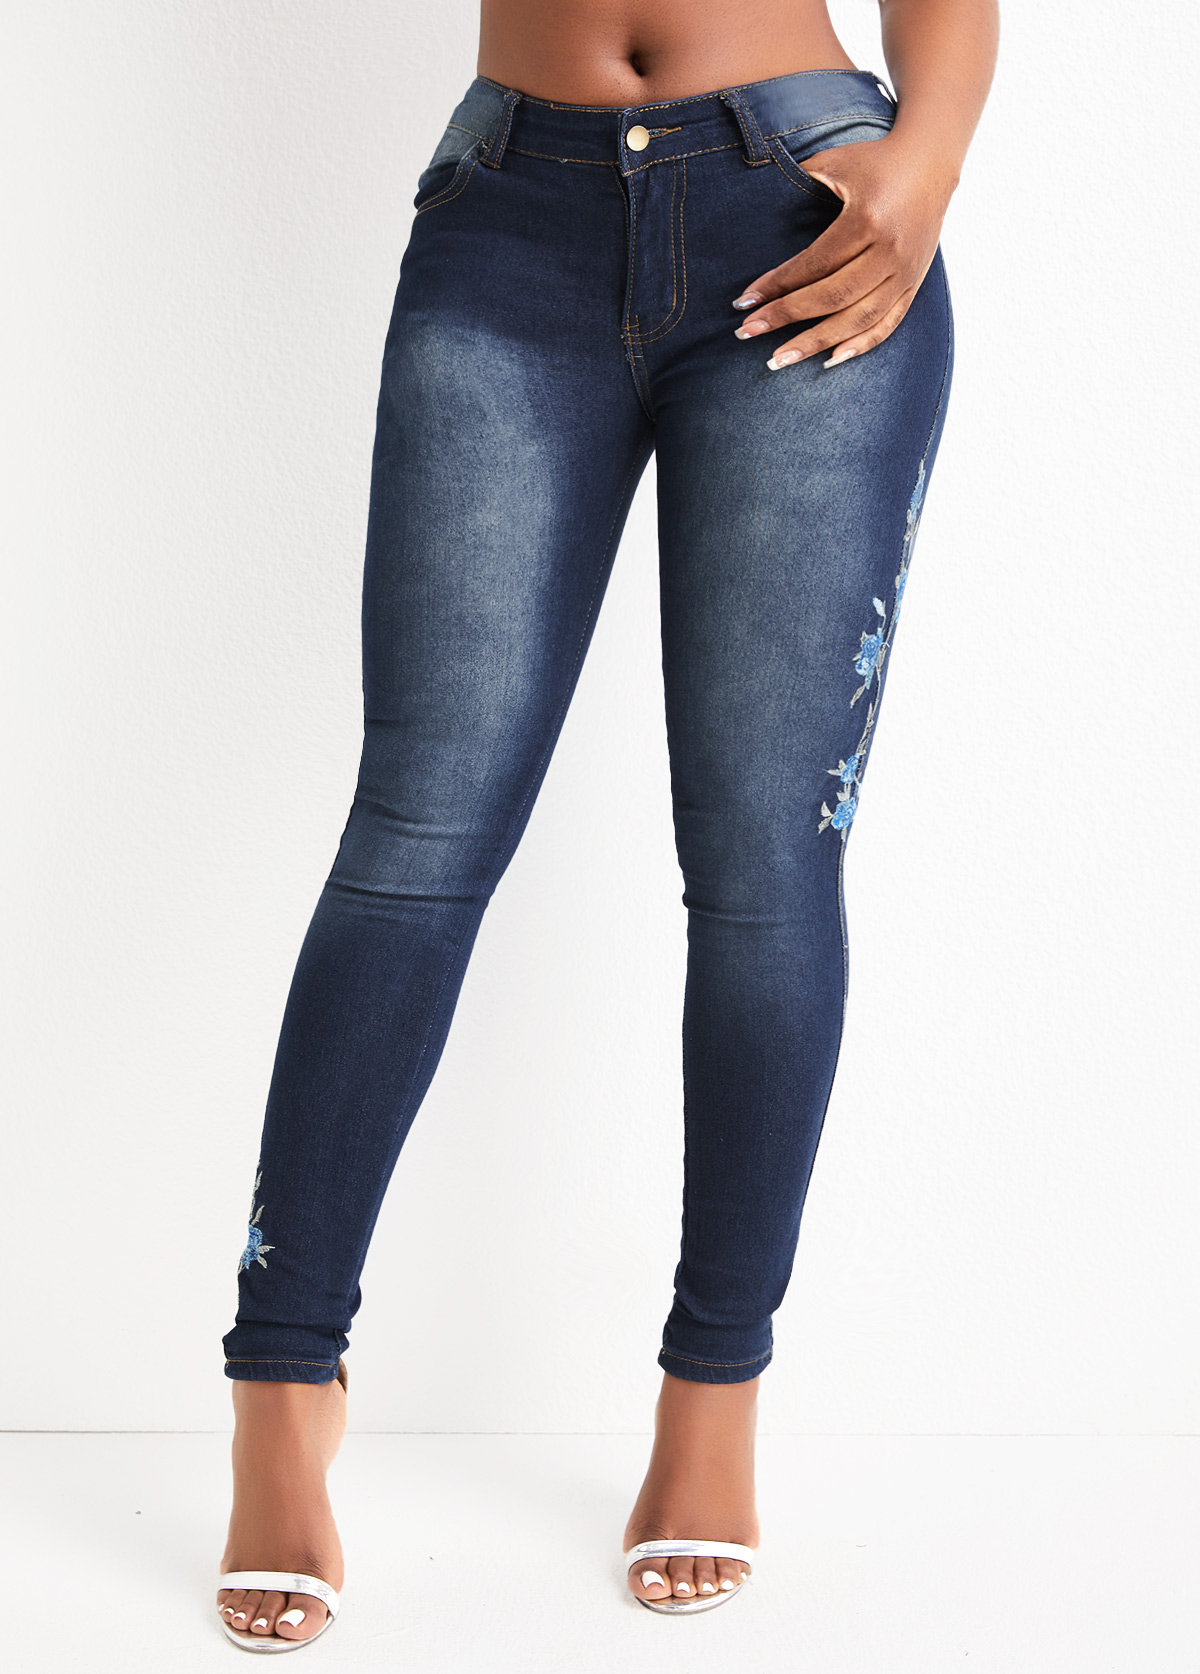 Embroidery Floral Print Denim Blue Skinny Zipper Fly Jeans